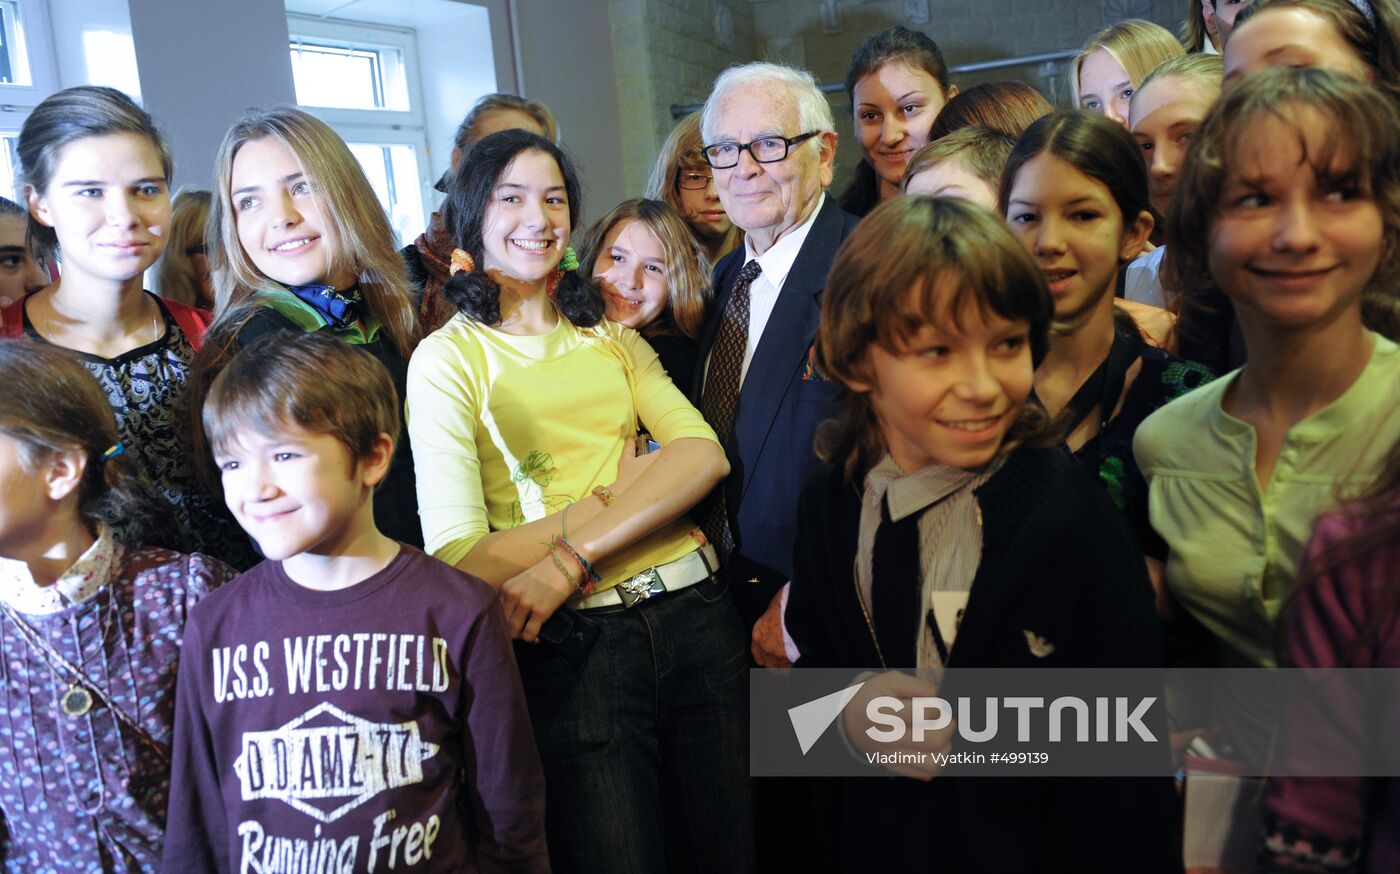 Pierre Cardin's visit to Moscow